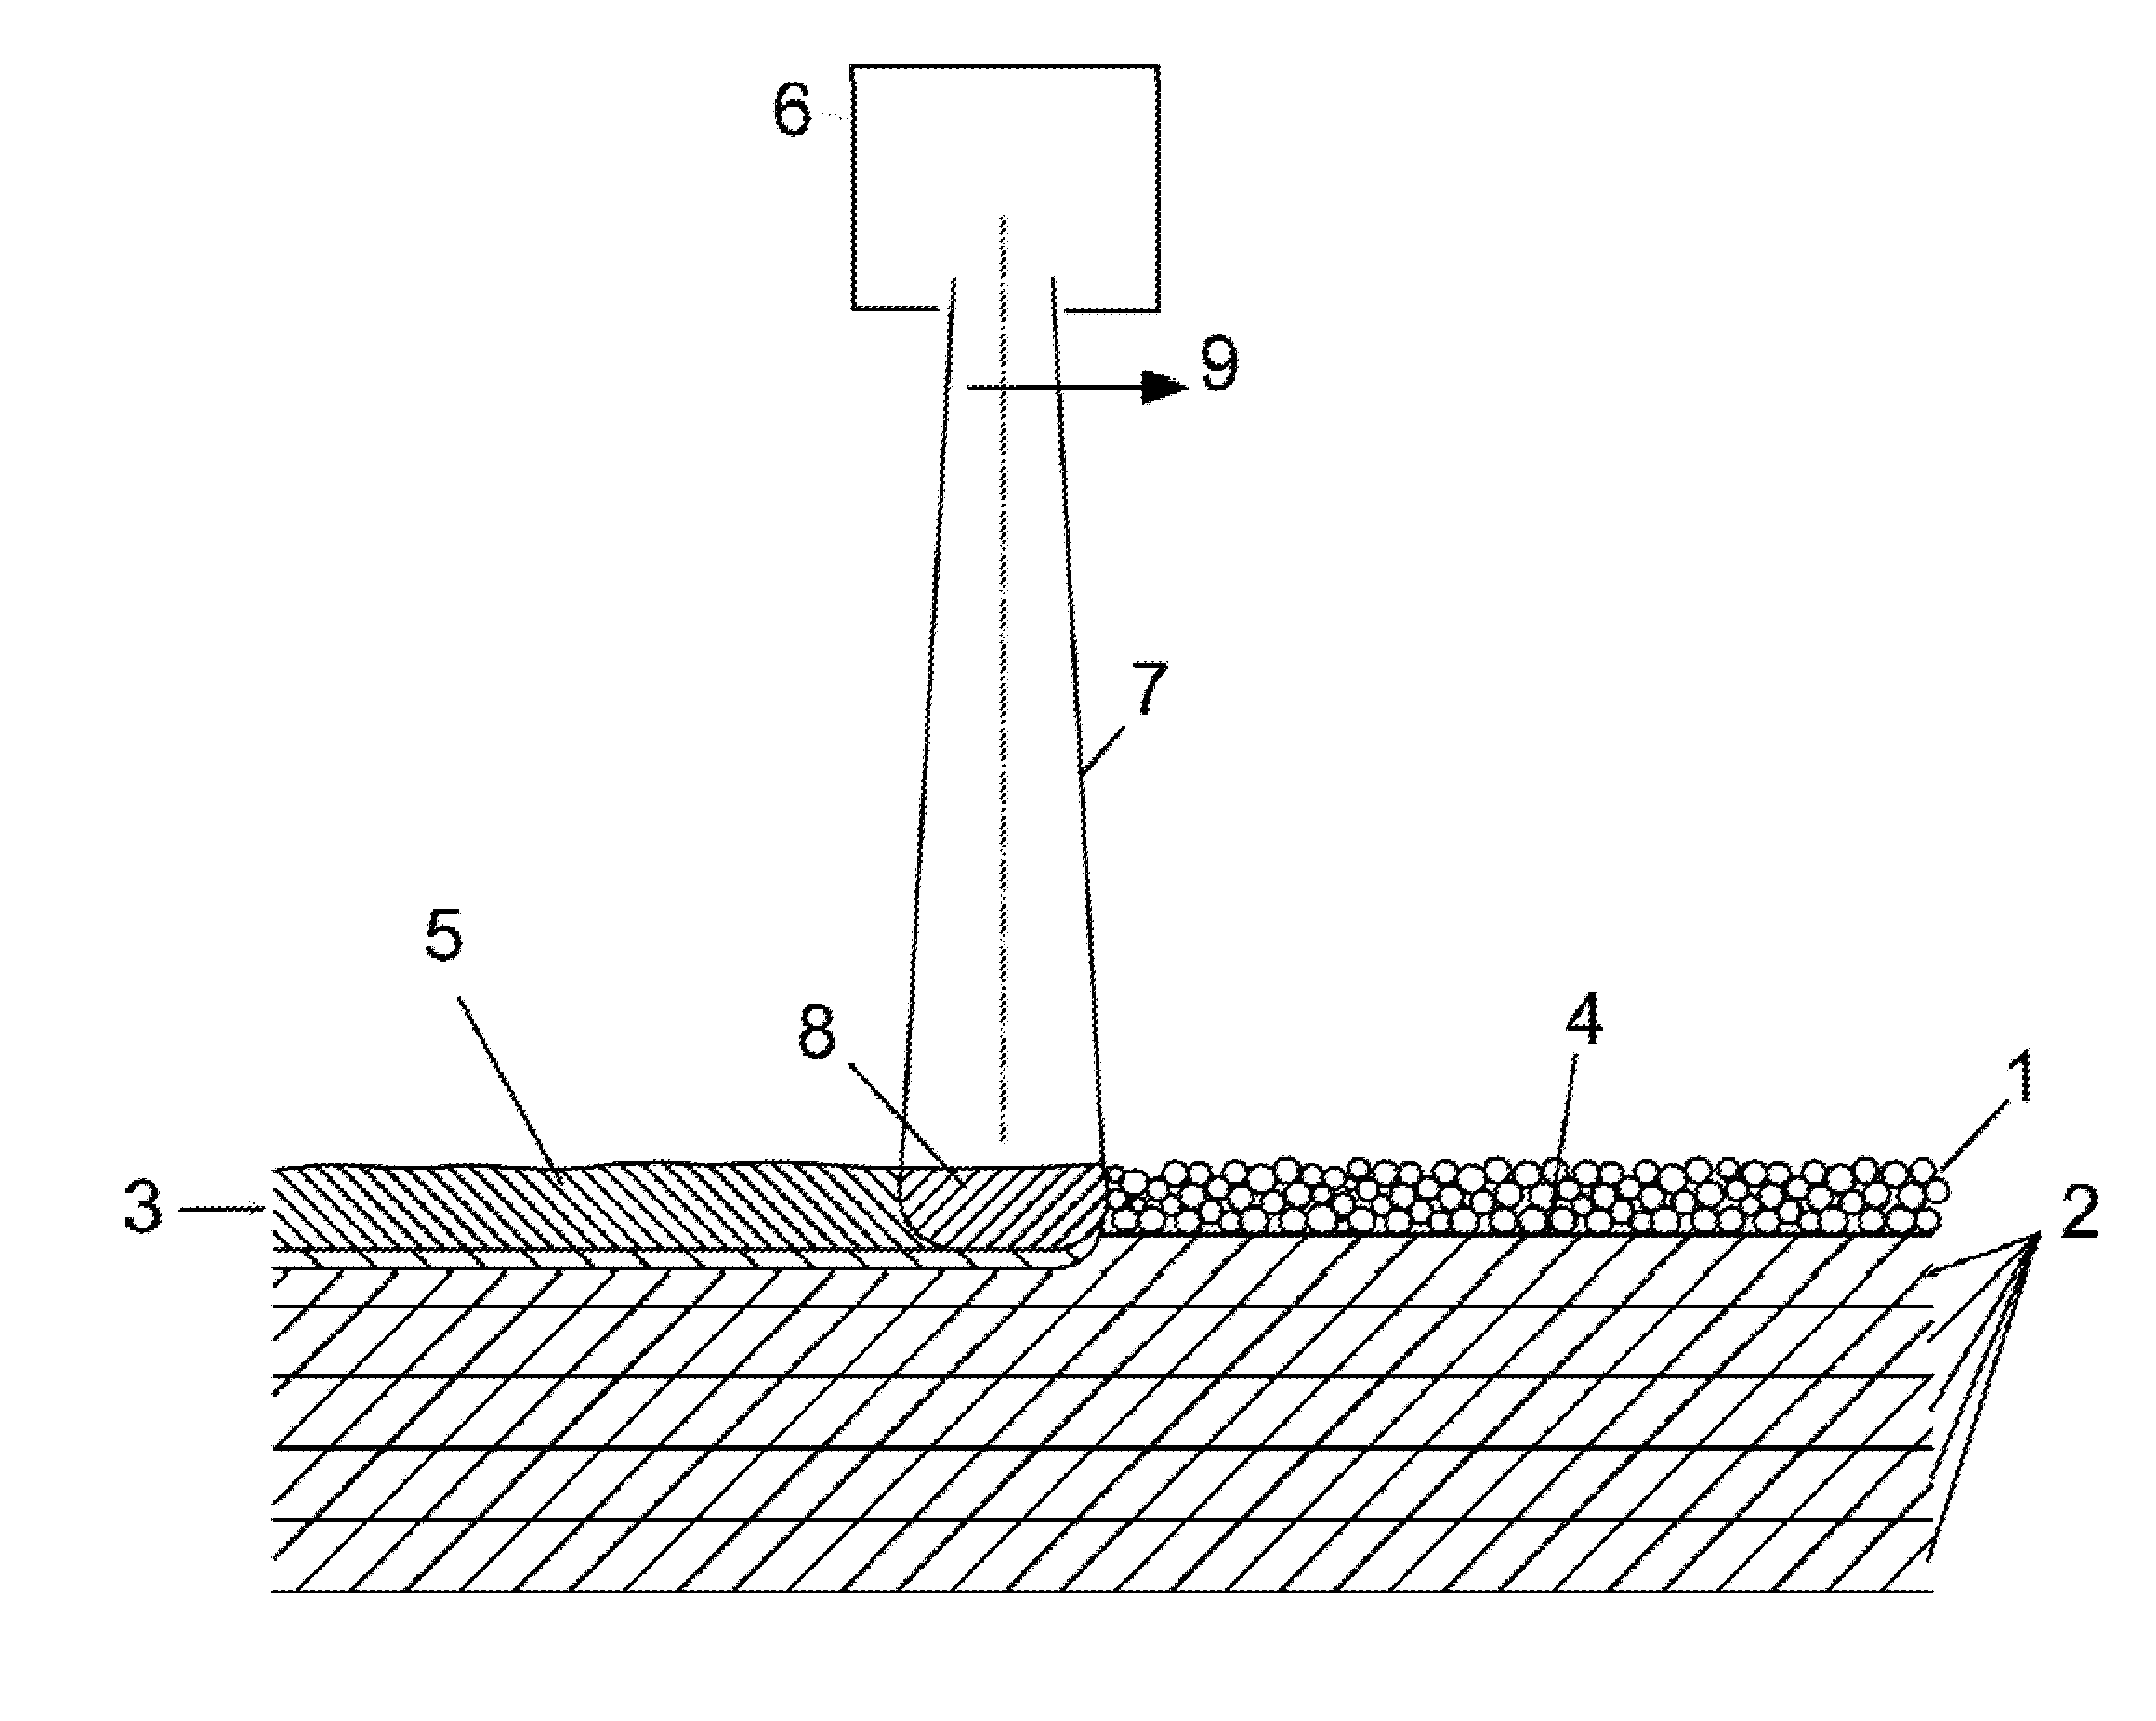 Method for Producing a Component